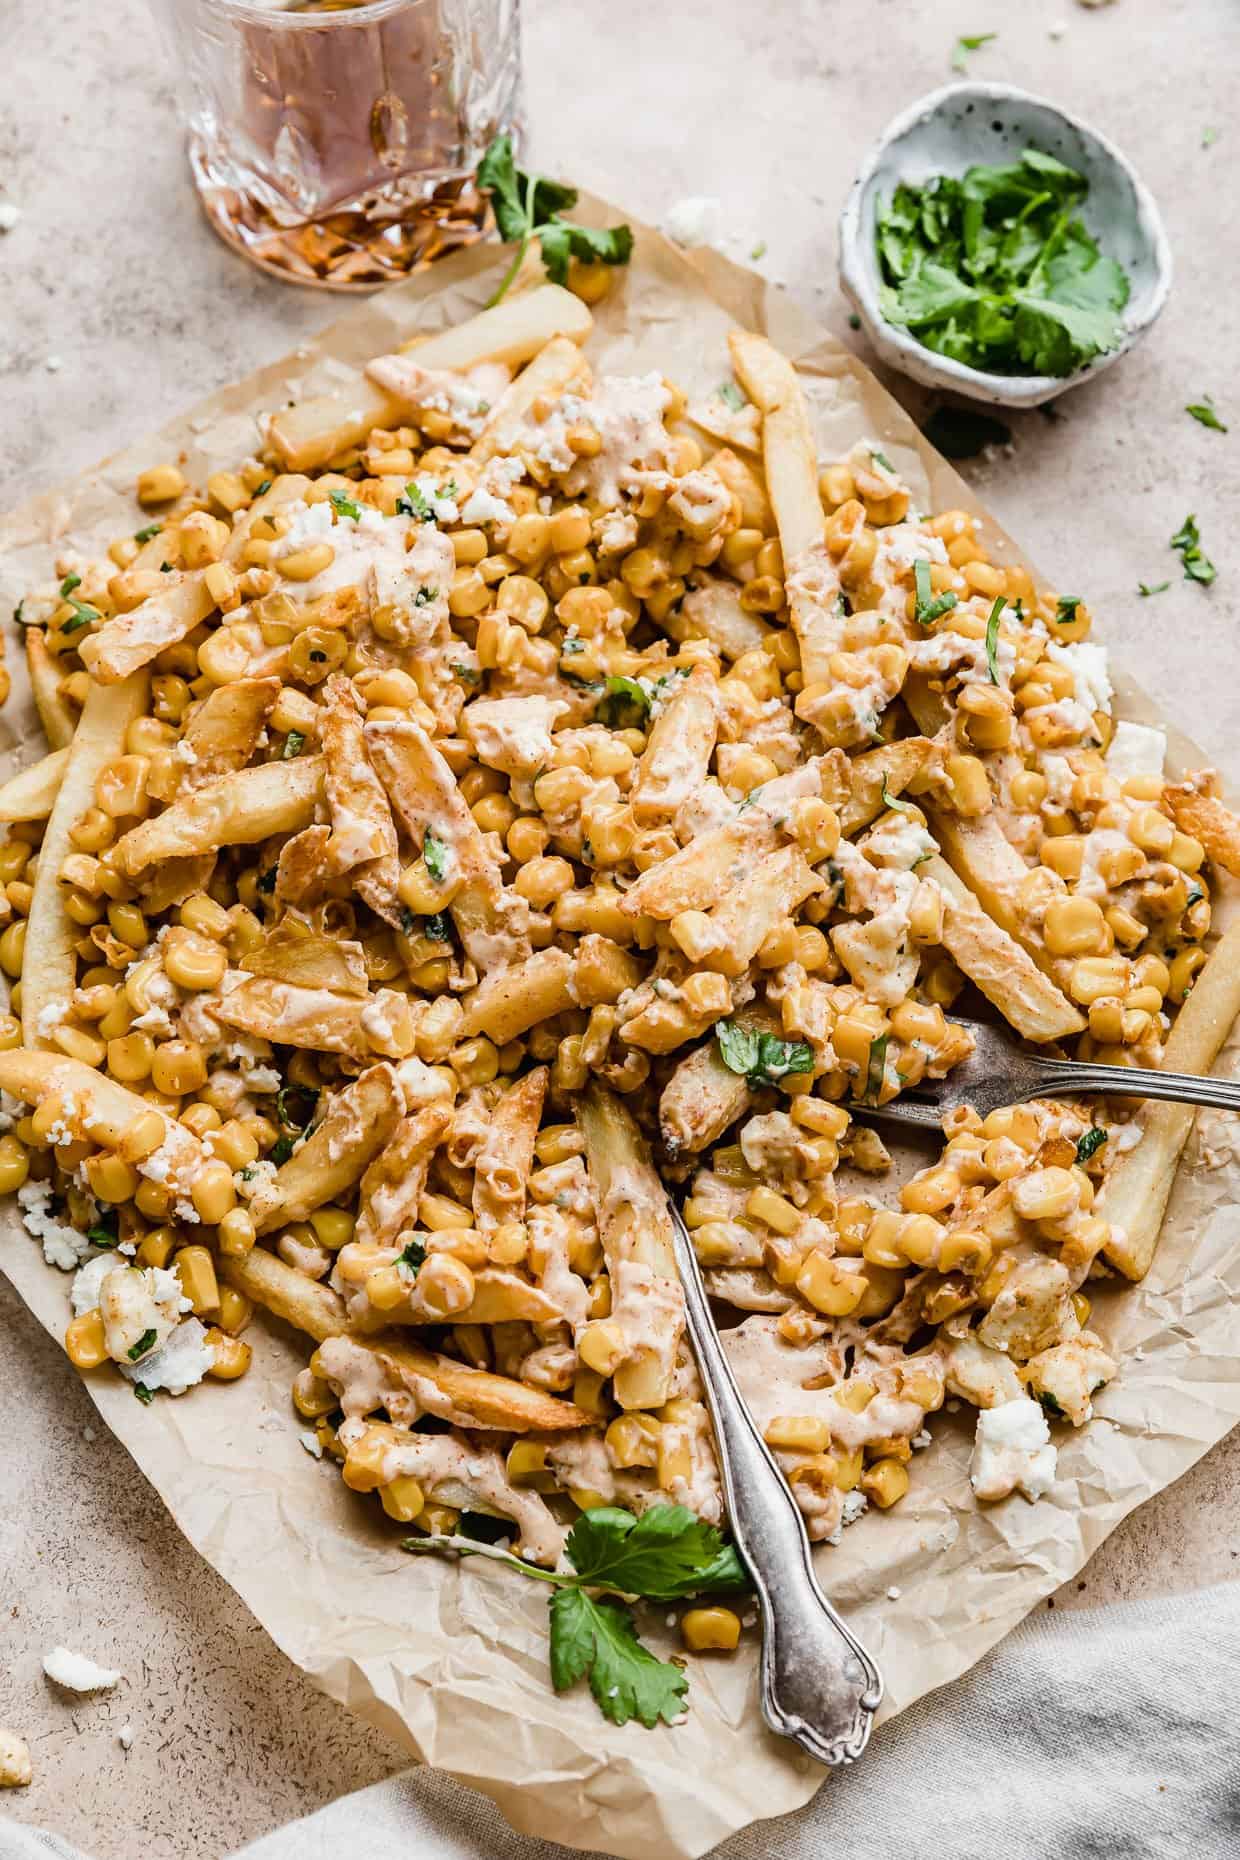 Fries topped with a Mexican Street Corn mixture, cheese, and cilantro on a parchment paper.